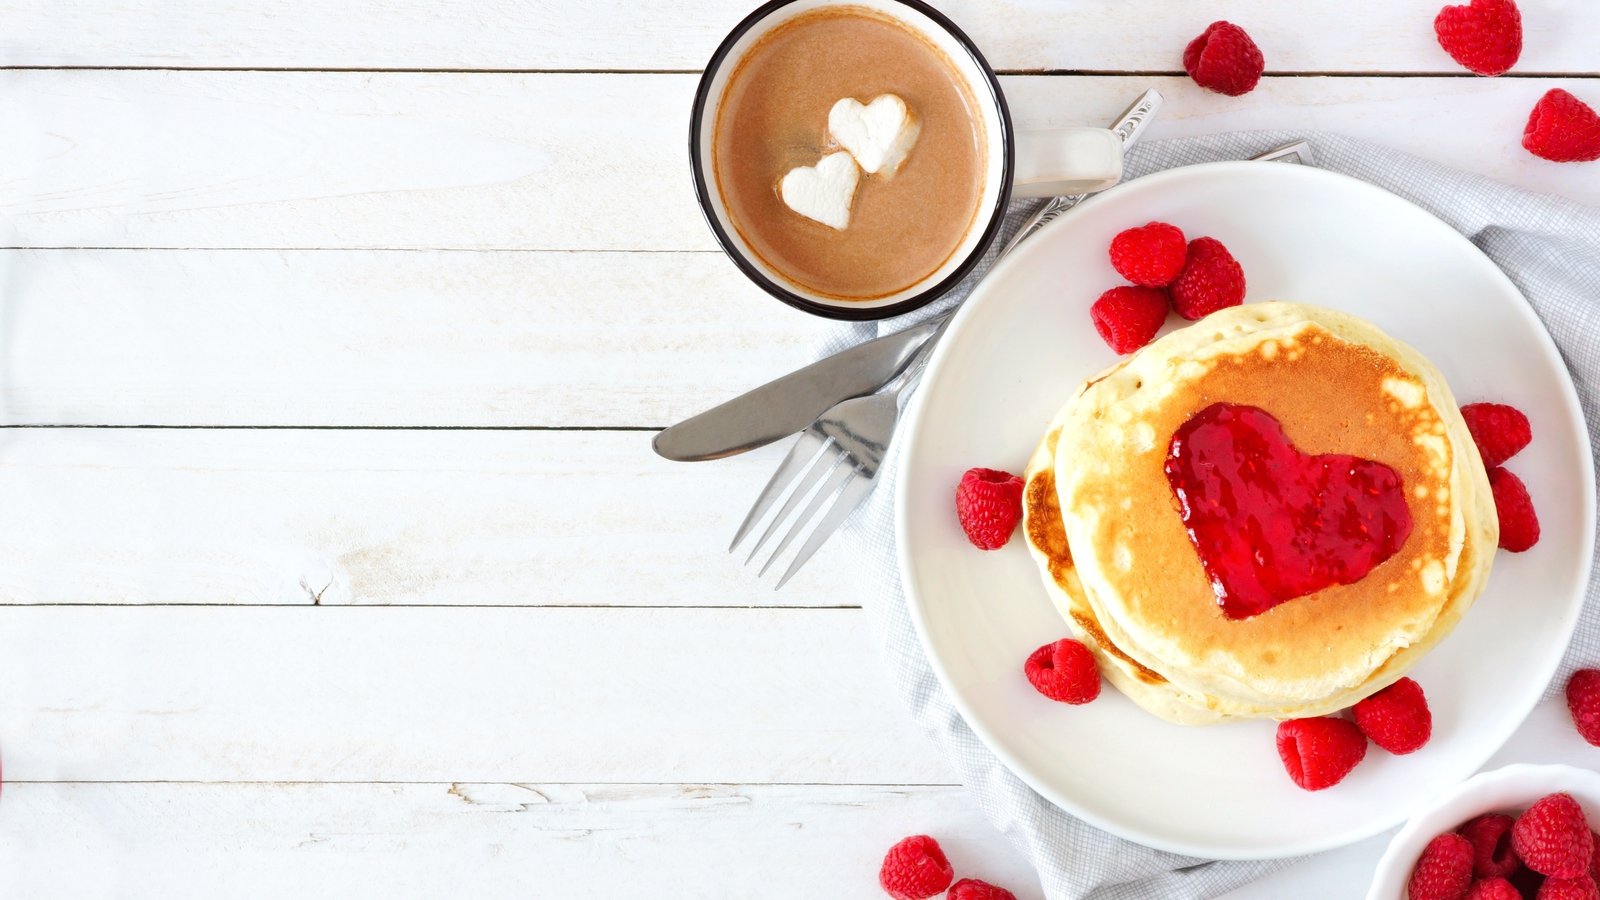 This Valentine's Day, pancakes can be romantic too